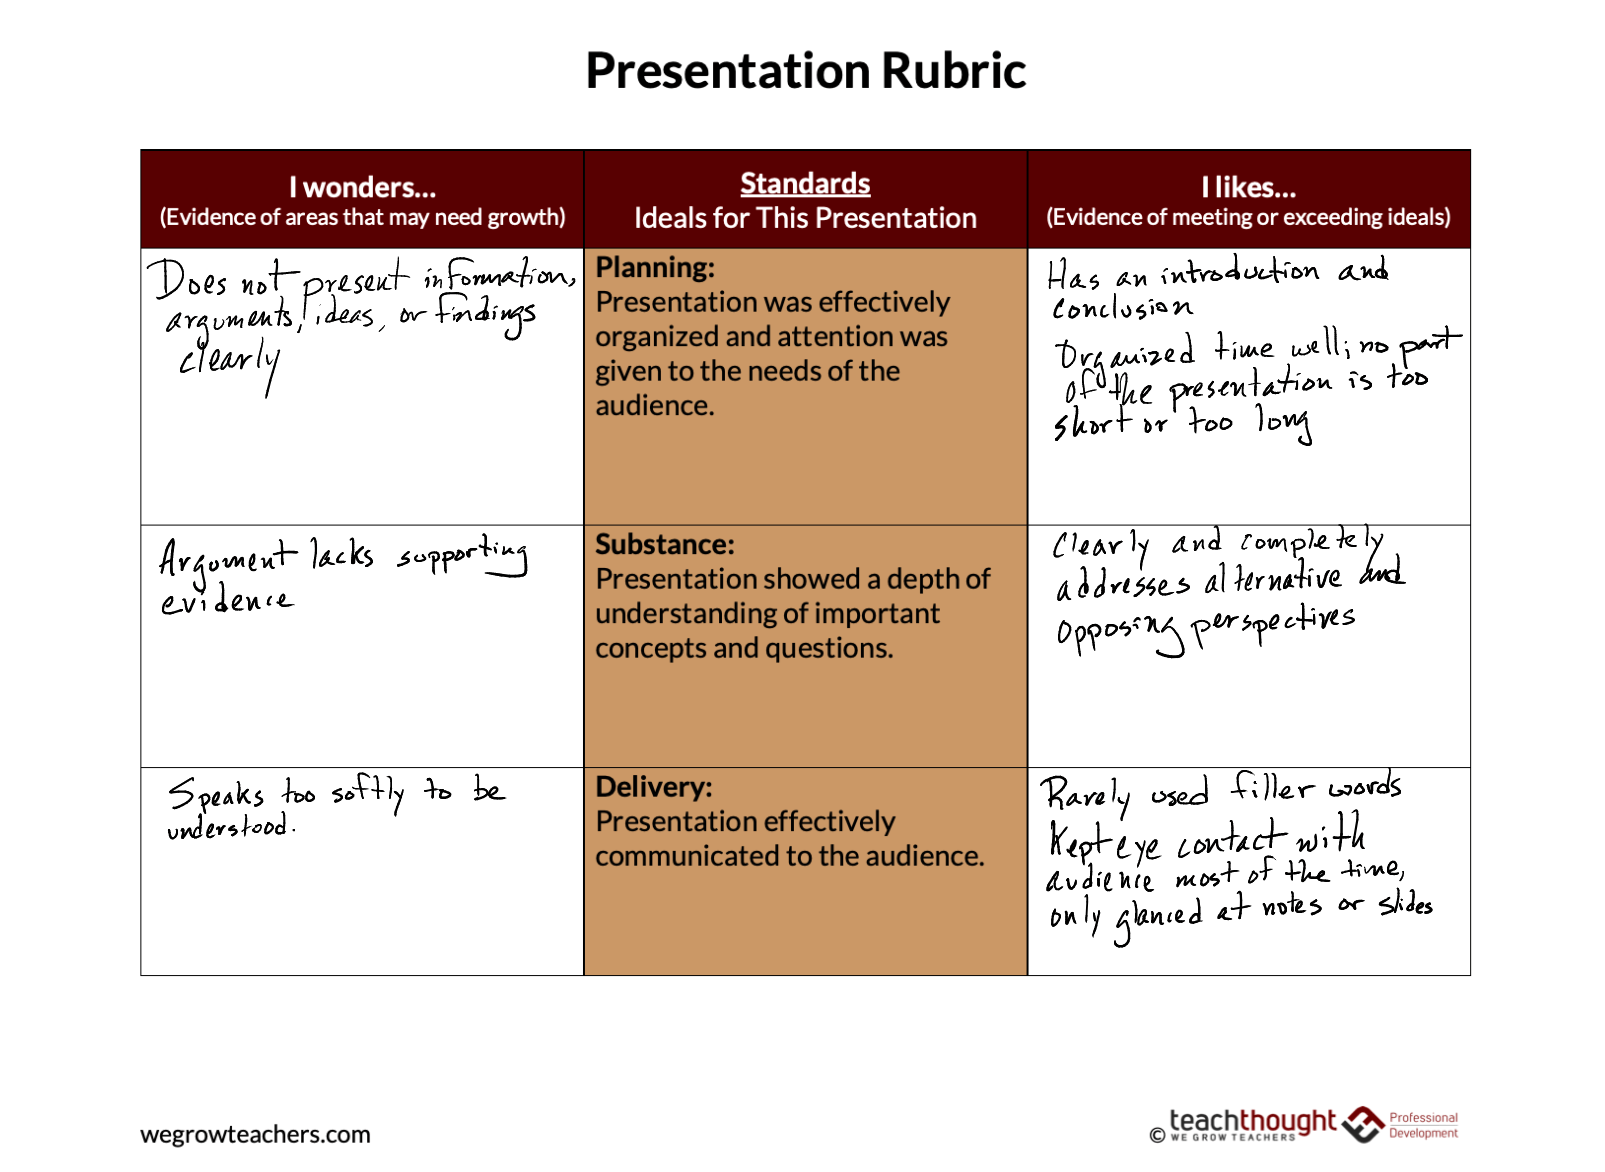 How SinglePoint Rubrics Can Improve The Quality Of Student Work